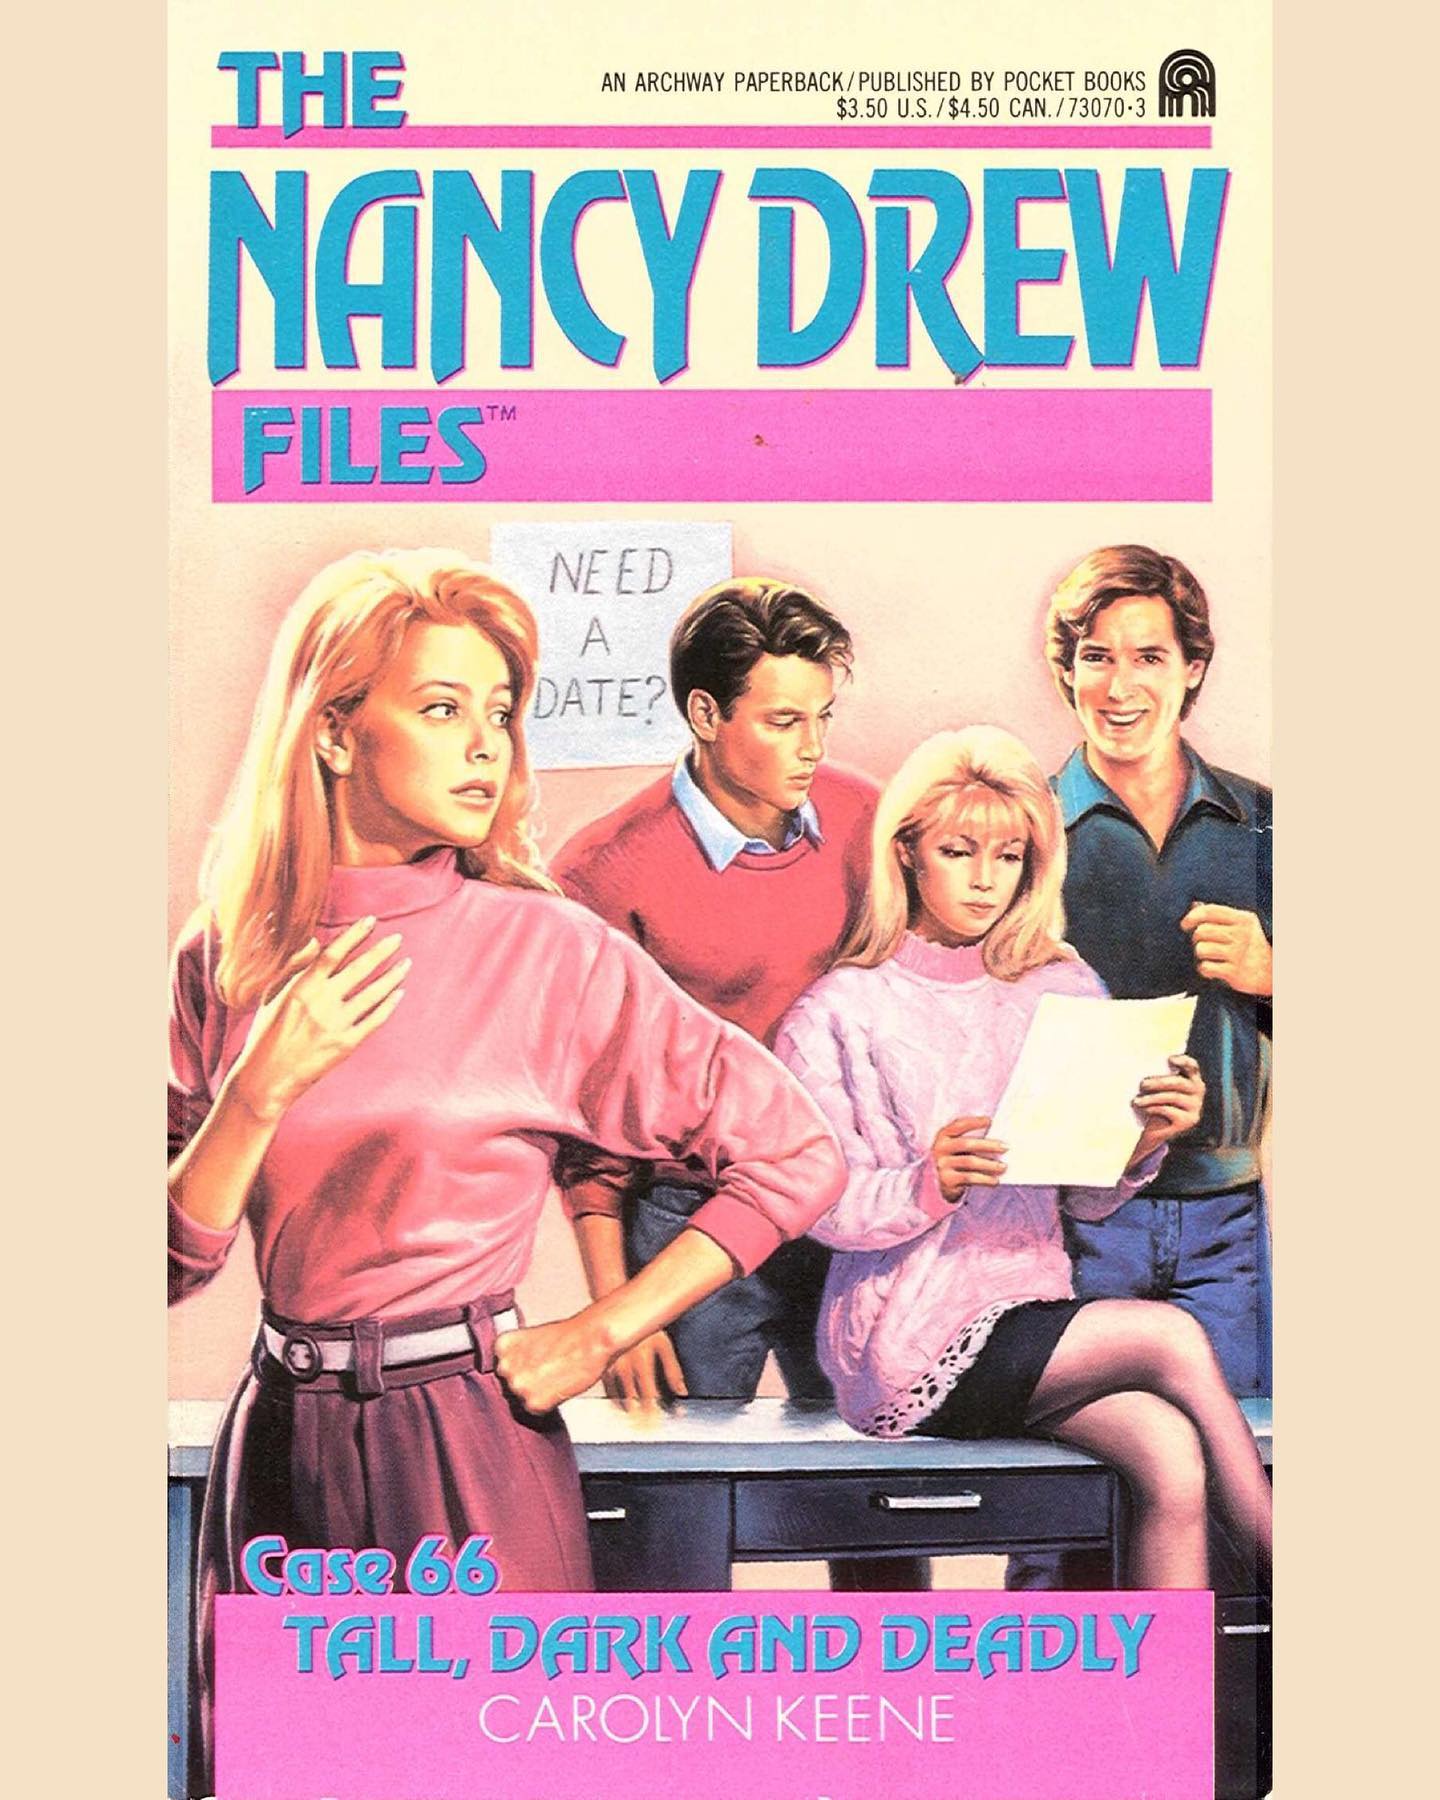 Todays read. 🤓
It includes a dating service at a school and Bess joins in. 🥳 That’s her in the background, with the boys! 😄 

#nancydrew #nancydrewfiles #carolynkeene #talldarkanddeadly